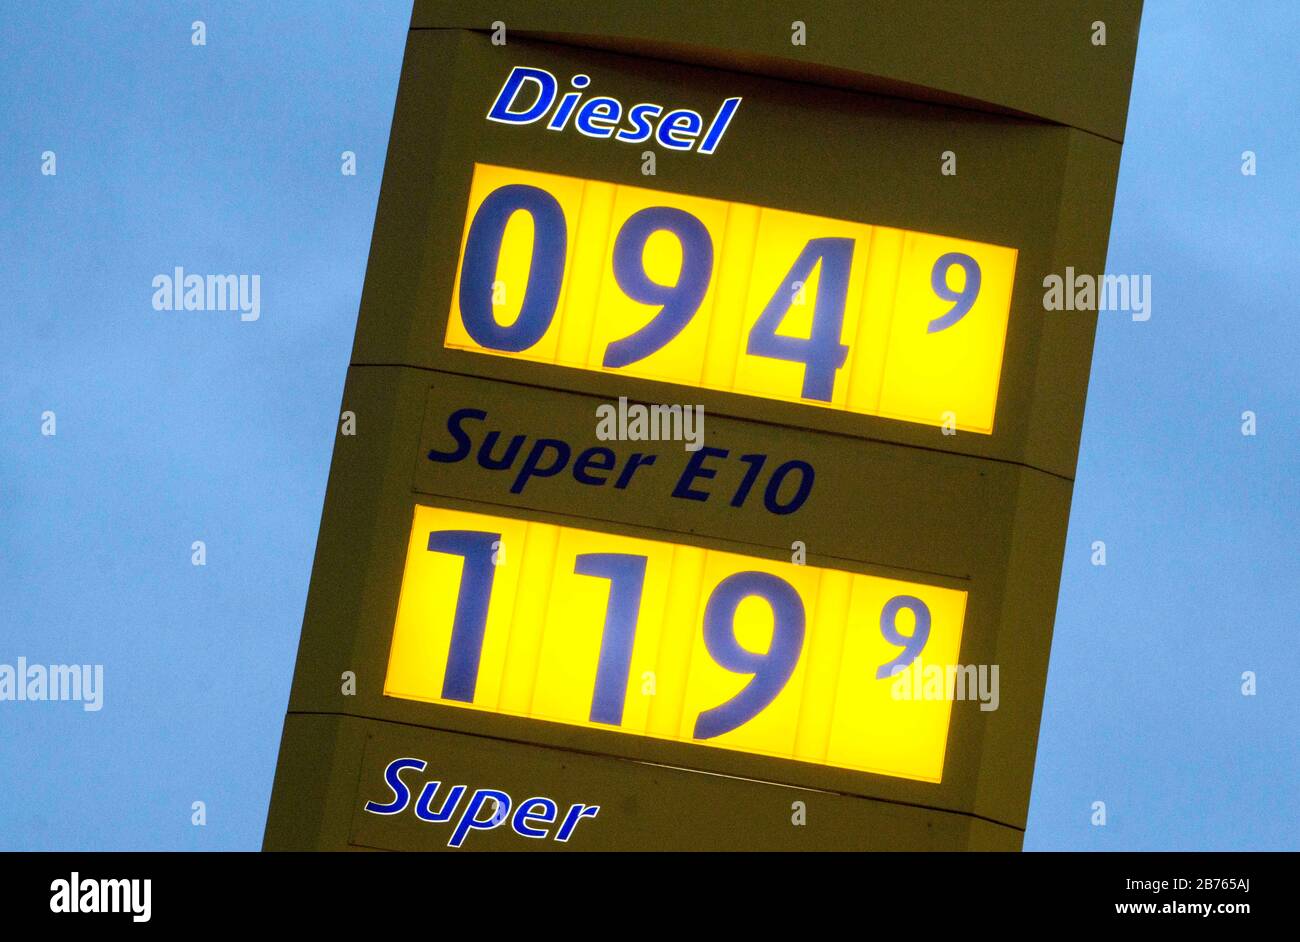 94.8 cents will be charged for one litre of diesel at a filling station in Berlin on 18.12.2015. [automated translation] Stock Photo